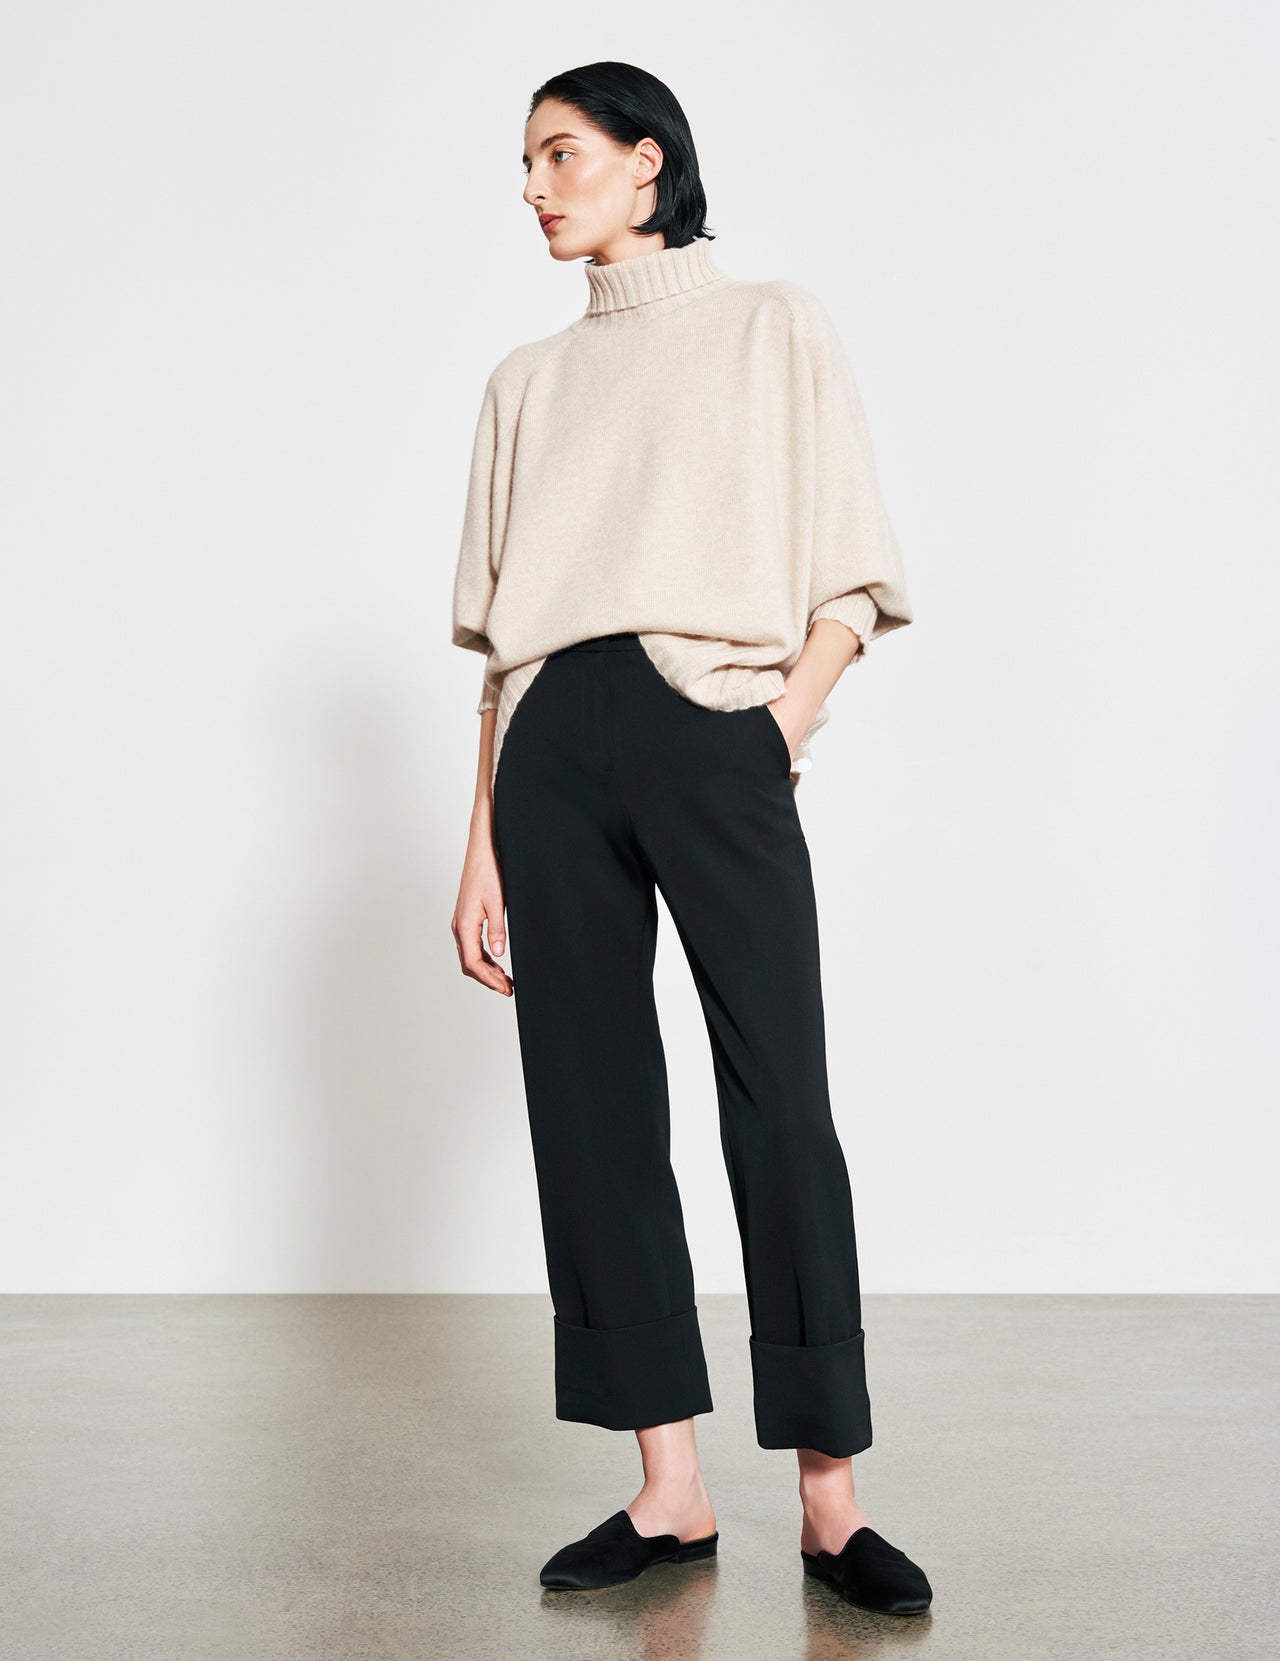  Black Straight Leg Trousers with Cuffs 